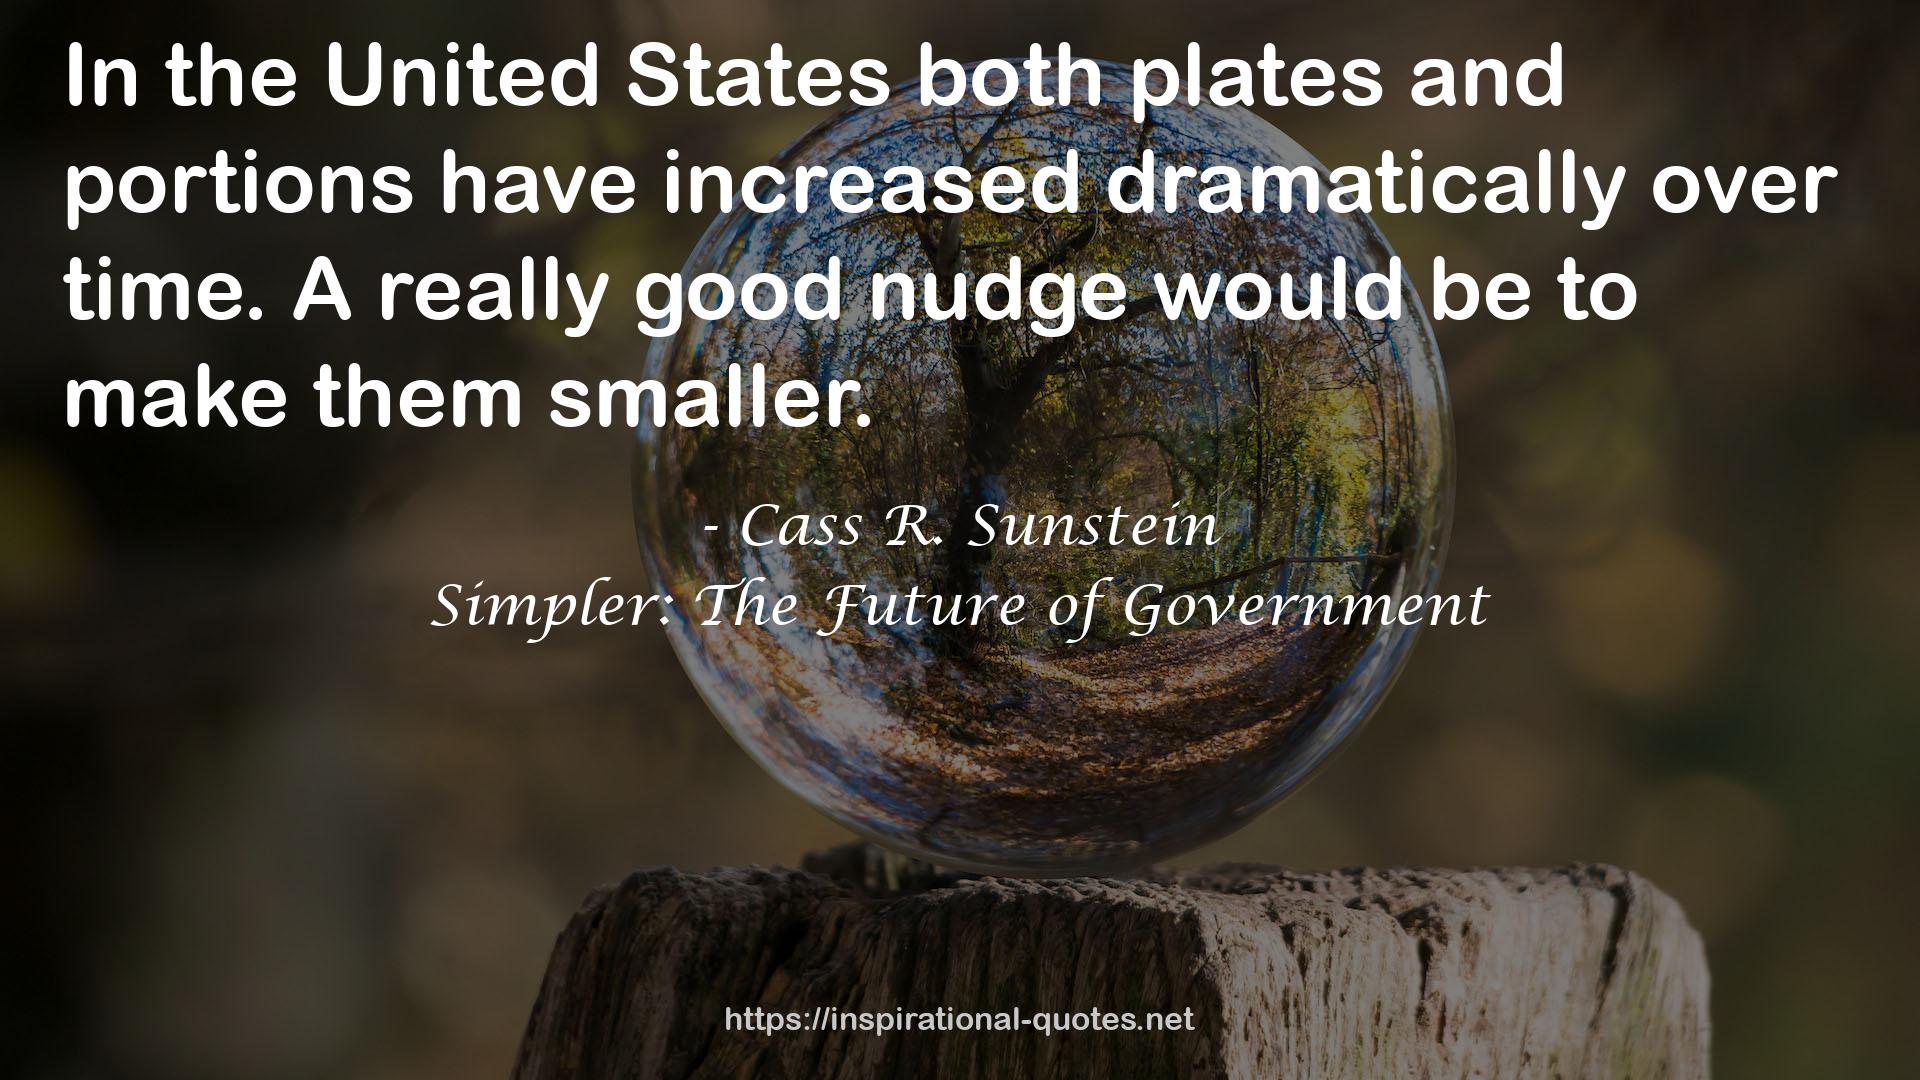 Simpler: The Future of Government QUOTES